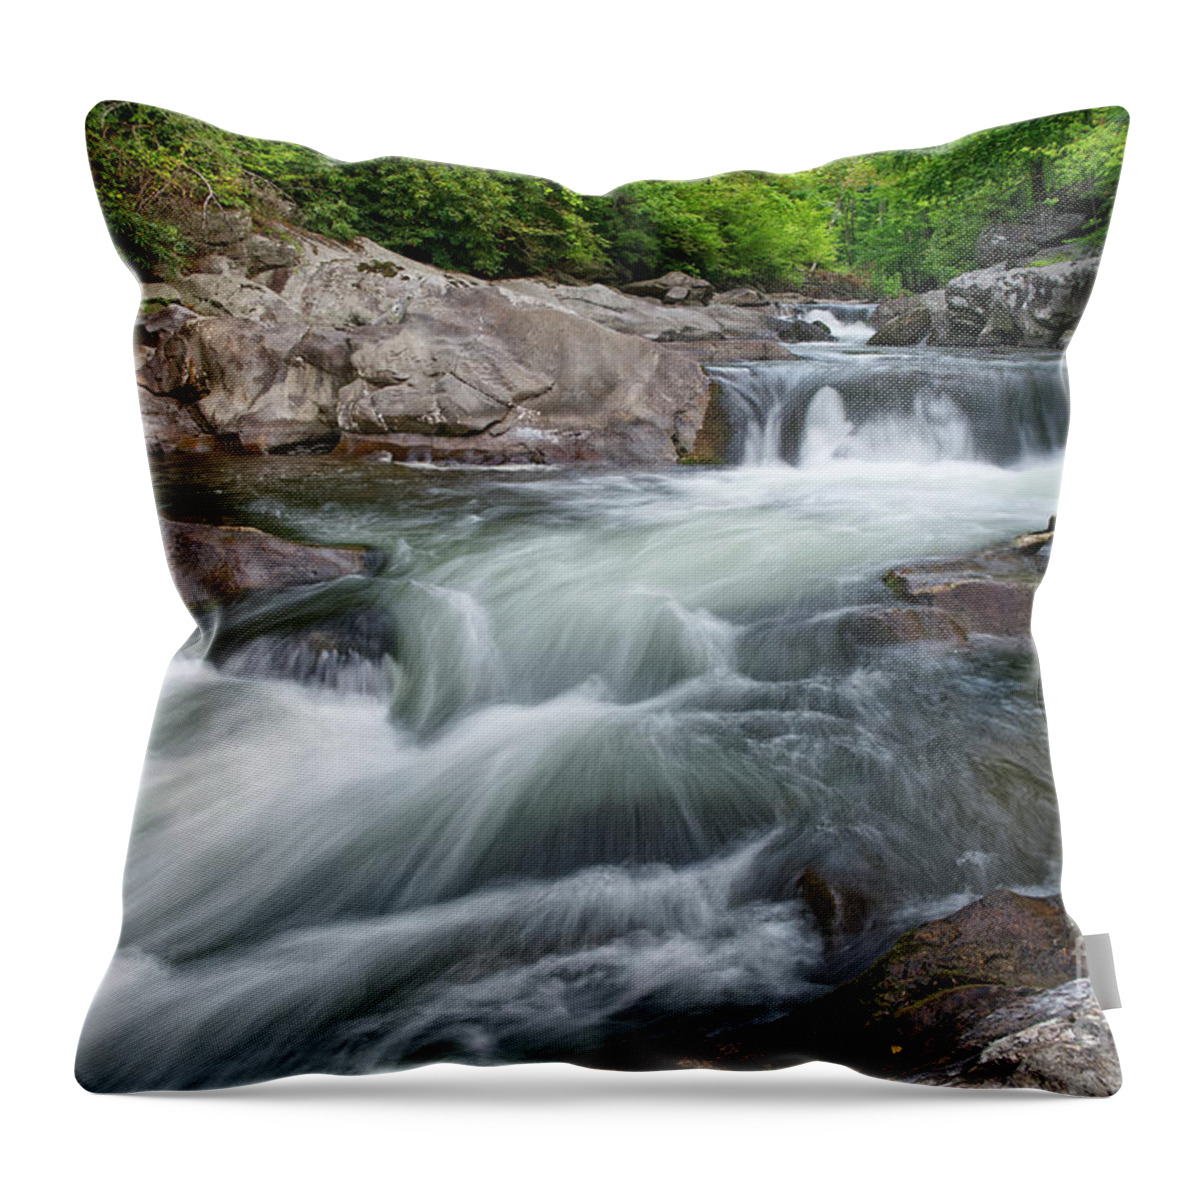 The Sinks Throw Pillow featuring the photograph The Sinks 14 by Phil Perkins